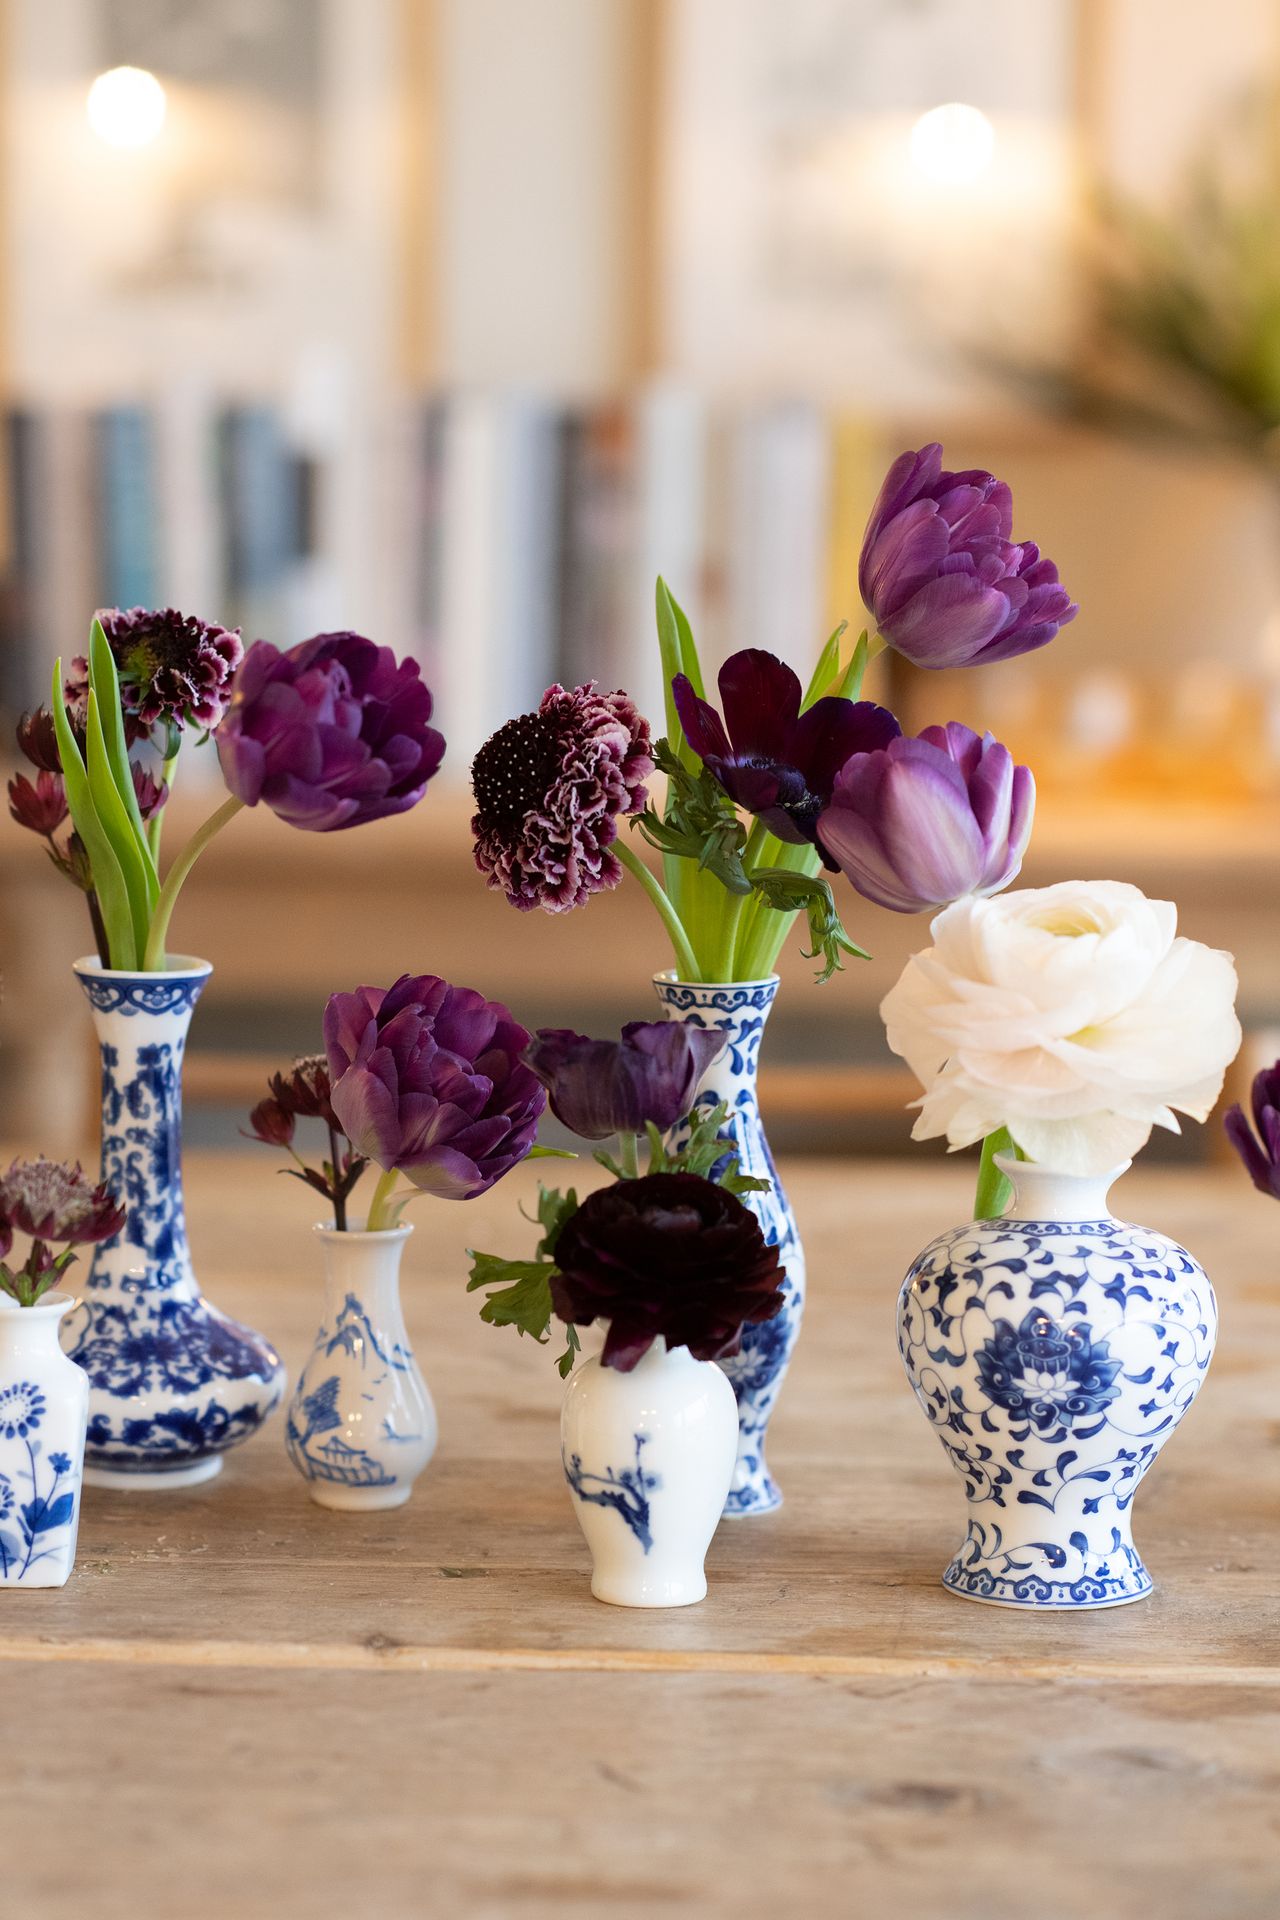 Decorating with vases: 13 ways to create beautiful displays